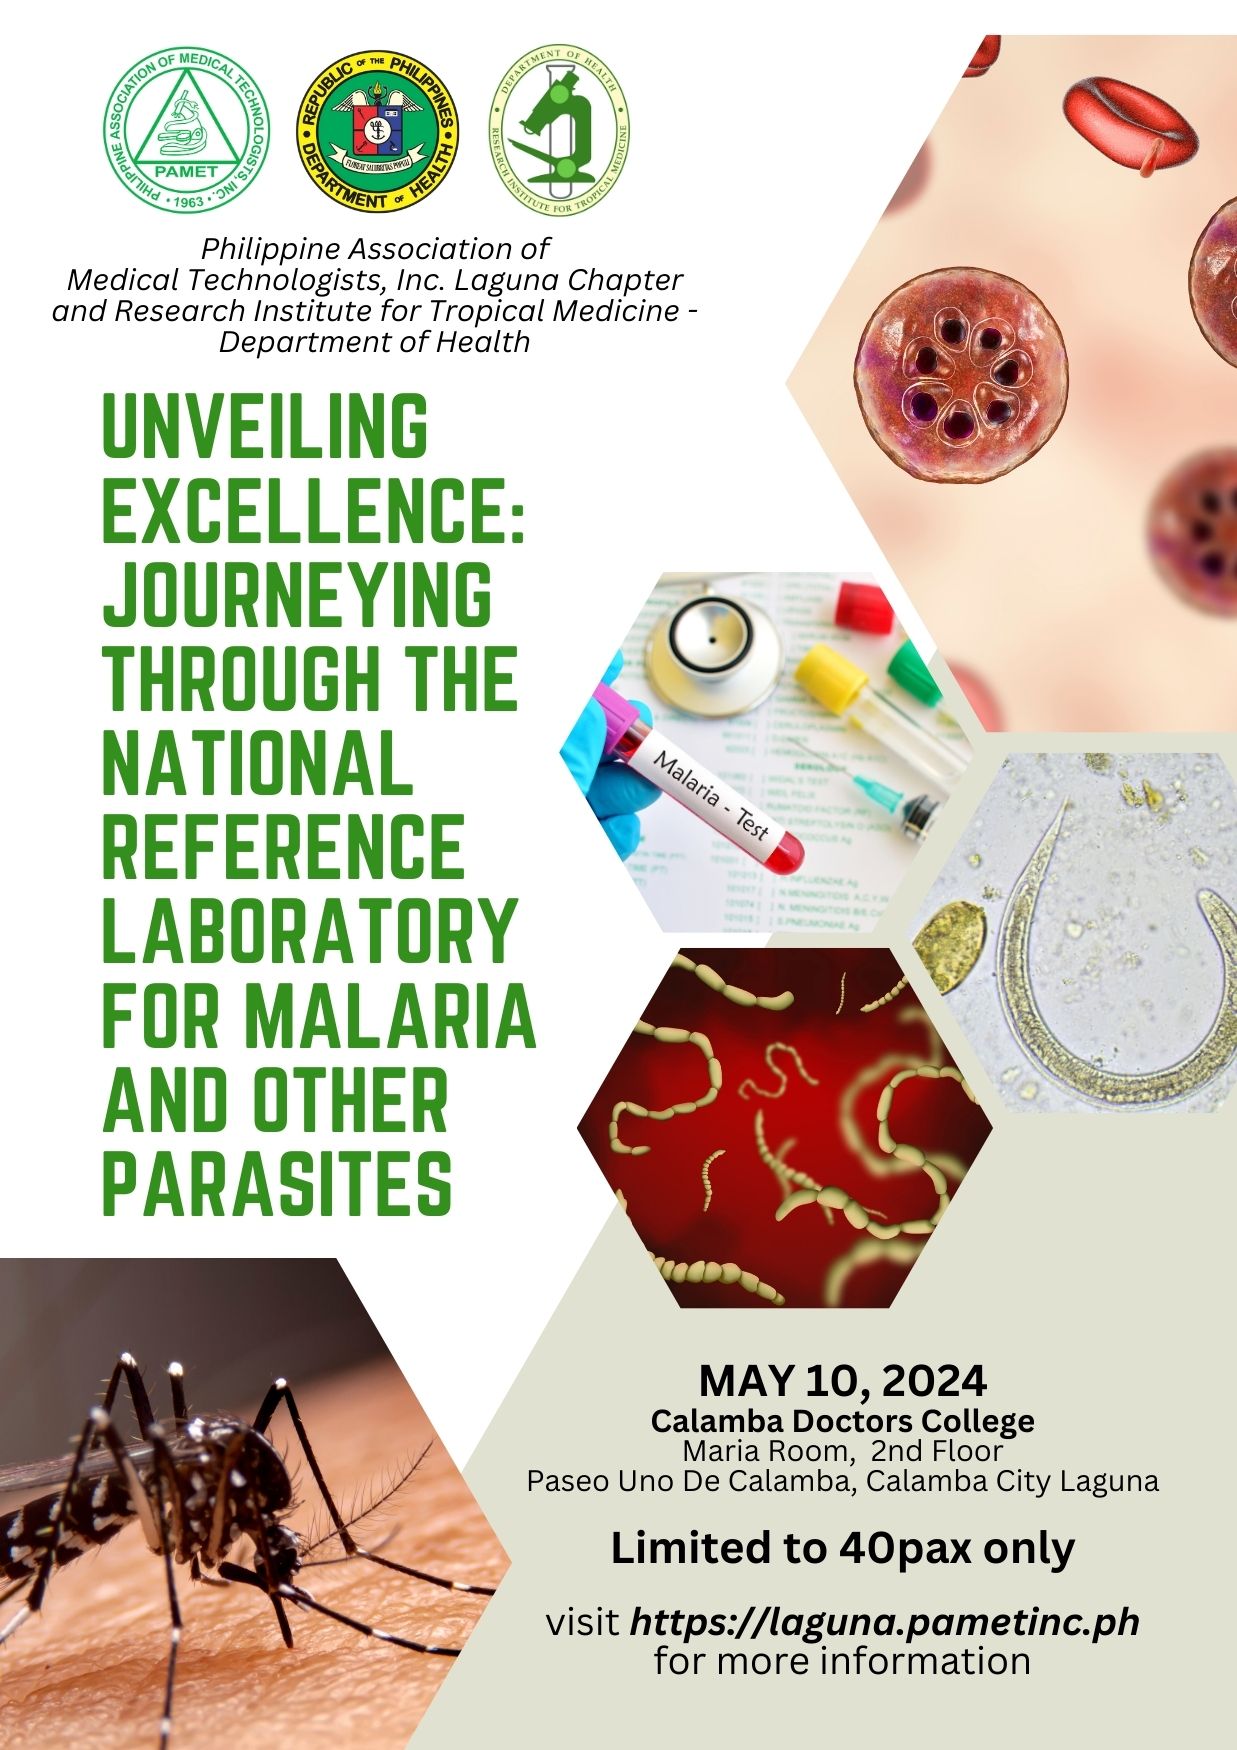 Unveiling Excellence: Journeying through the National Reference Laboratory for Malaria and other Parasites